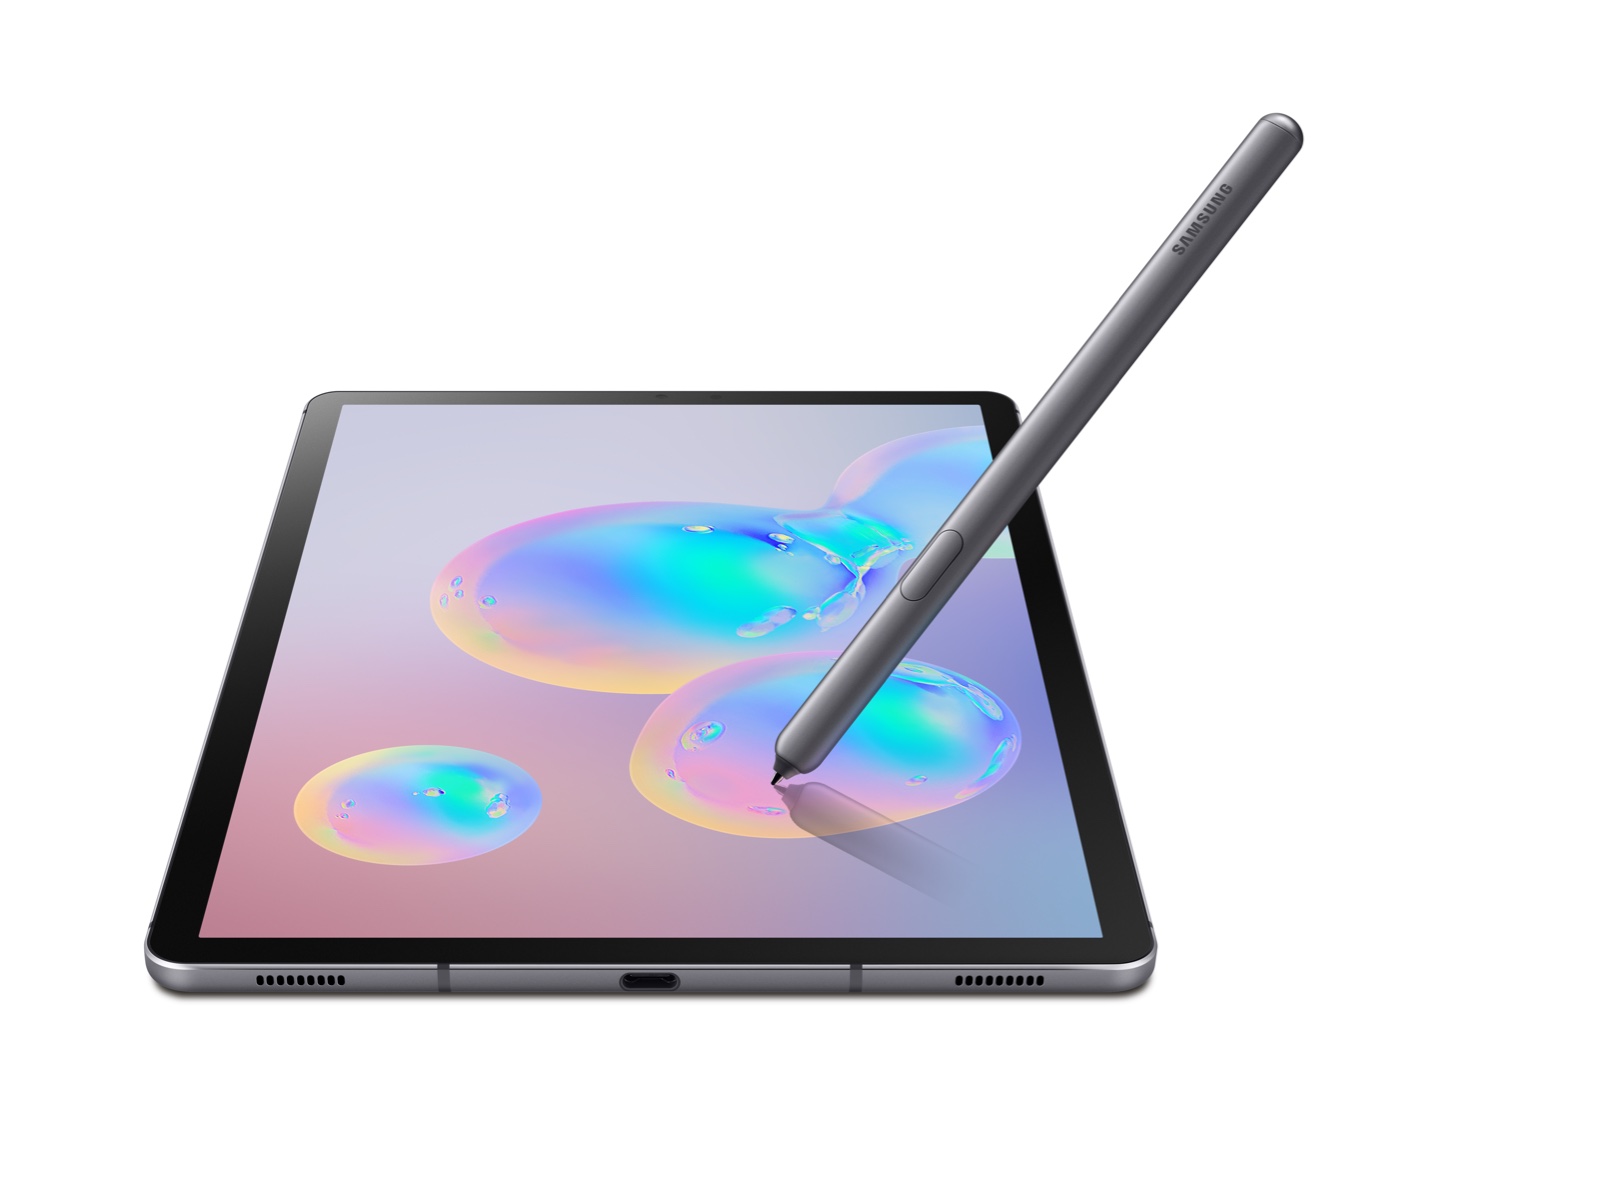 Thumbnail image of Galaxy Tab S6 10.5”, 256GB, Mountain Gray (Wi-Fi) S Pen included